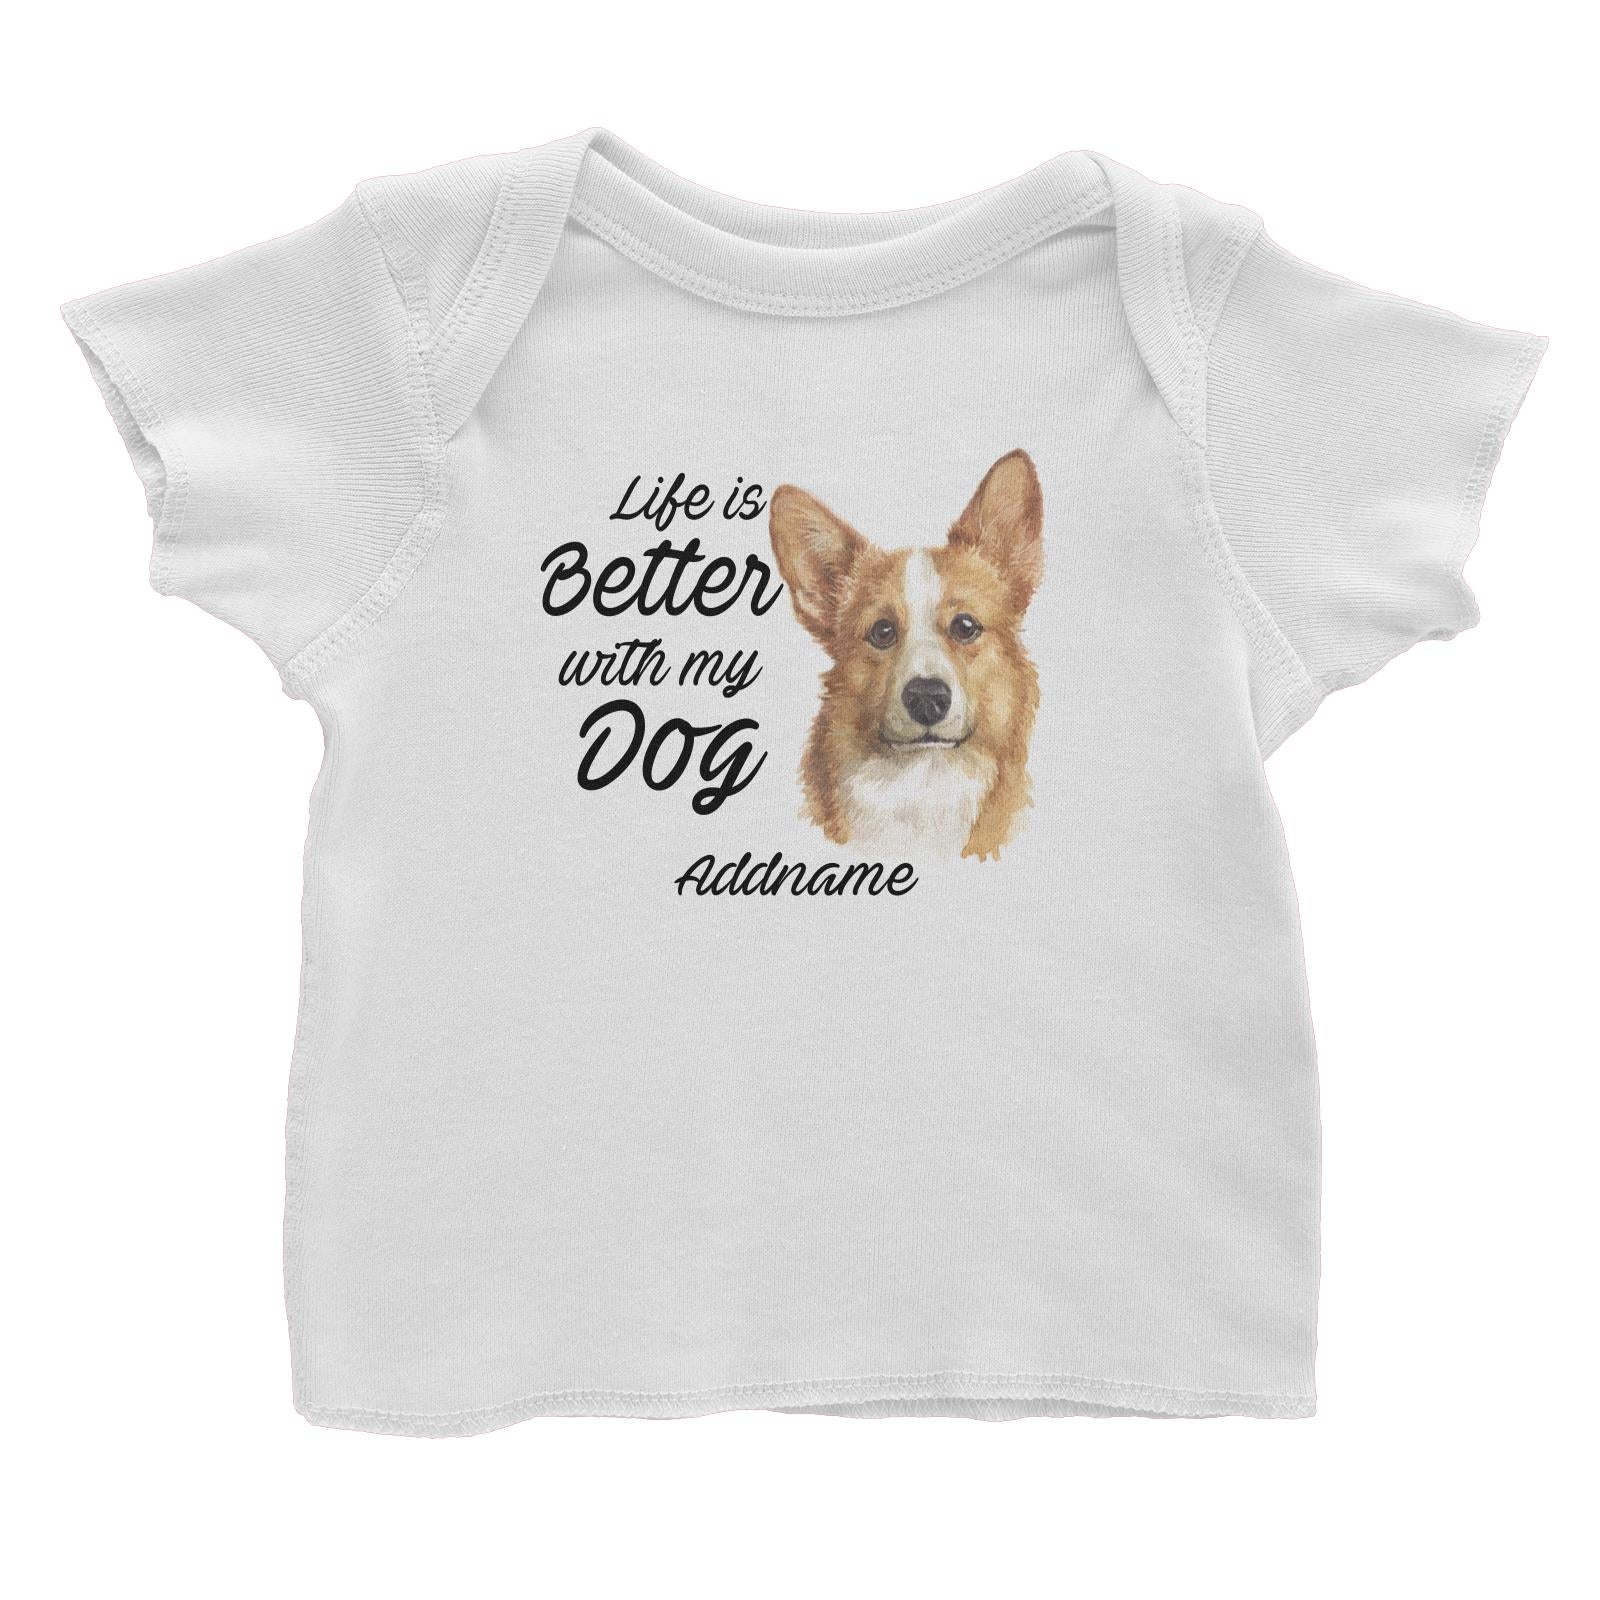 Watercolor Life is Better With My Dog Welsh Corgi Addname Baby T-Shirt